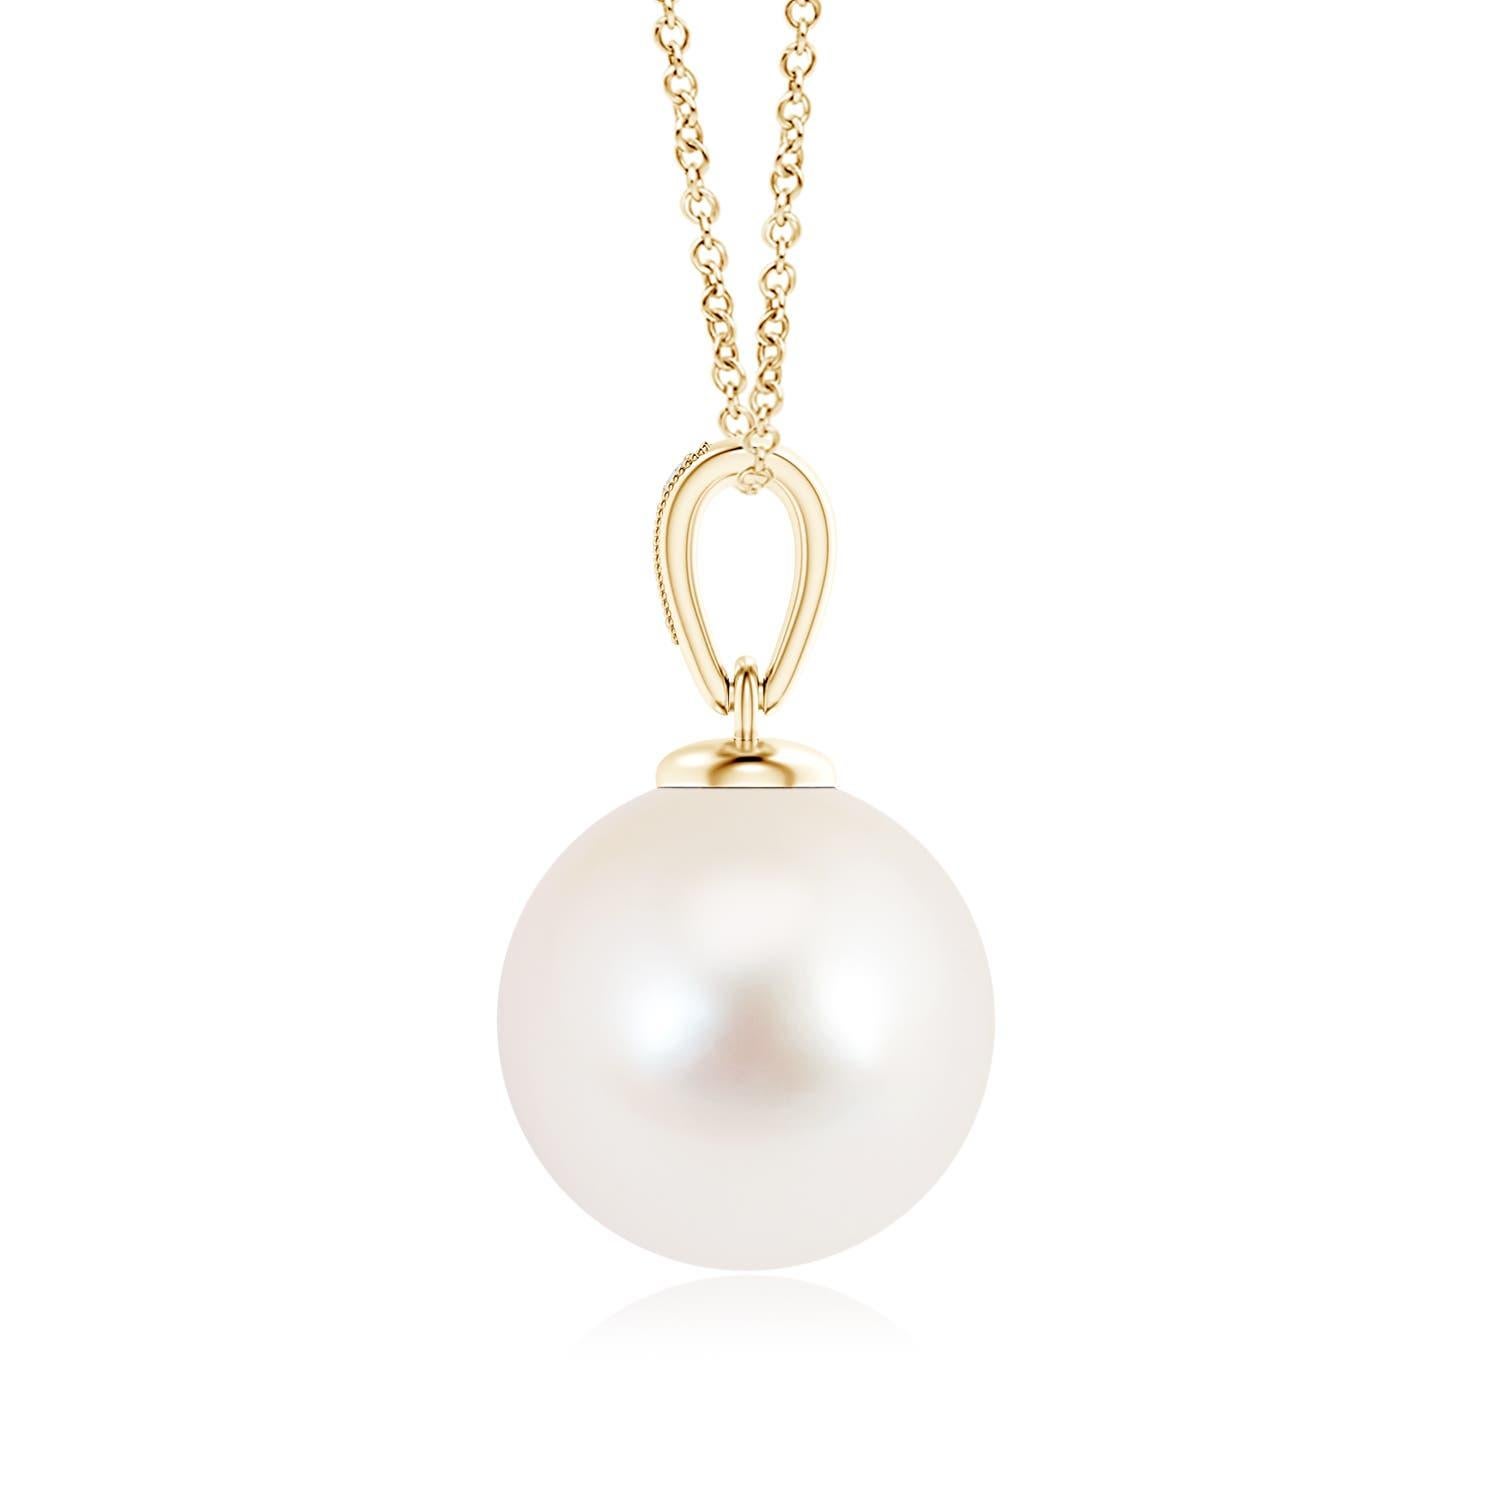 This 14K yellow gold solitaire pearl pendant offers a simple yet elegant look. The diamonds pavÃ© set on the bale offer a glittering effect to the lustrous pearl, while the milgrain detail on the bale lends a slight vintage touch. You can flaunt a